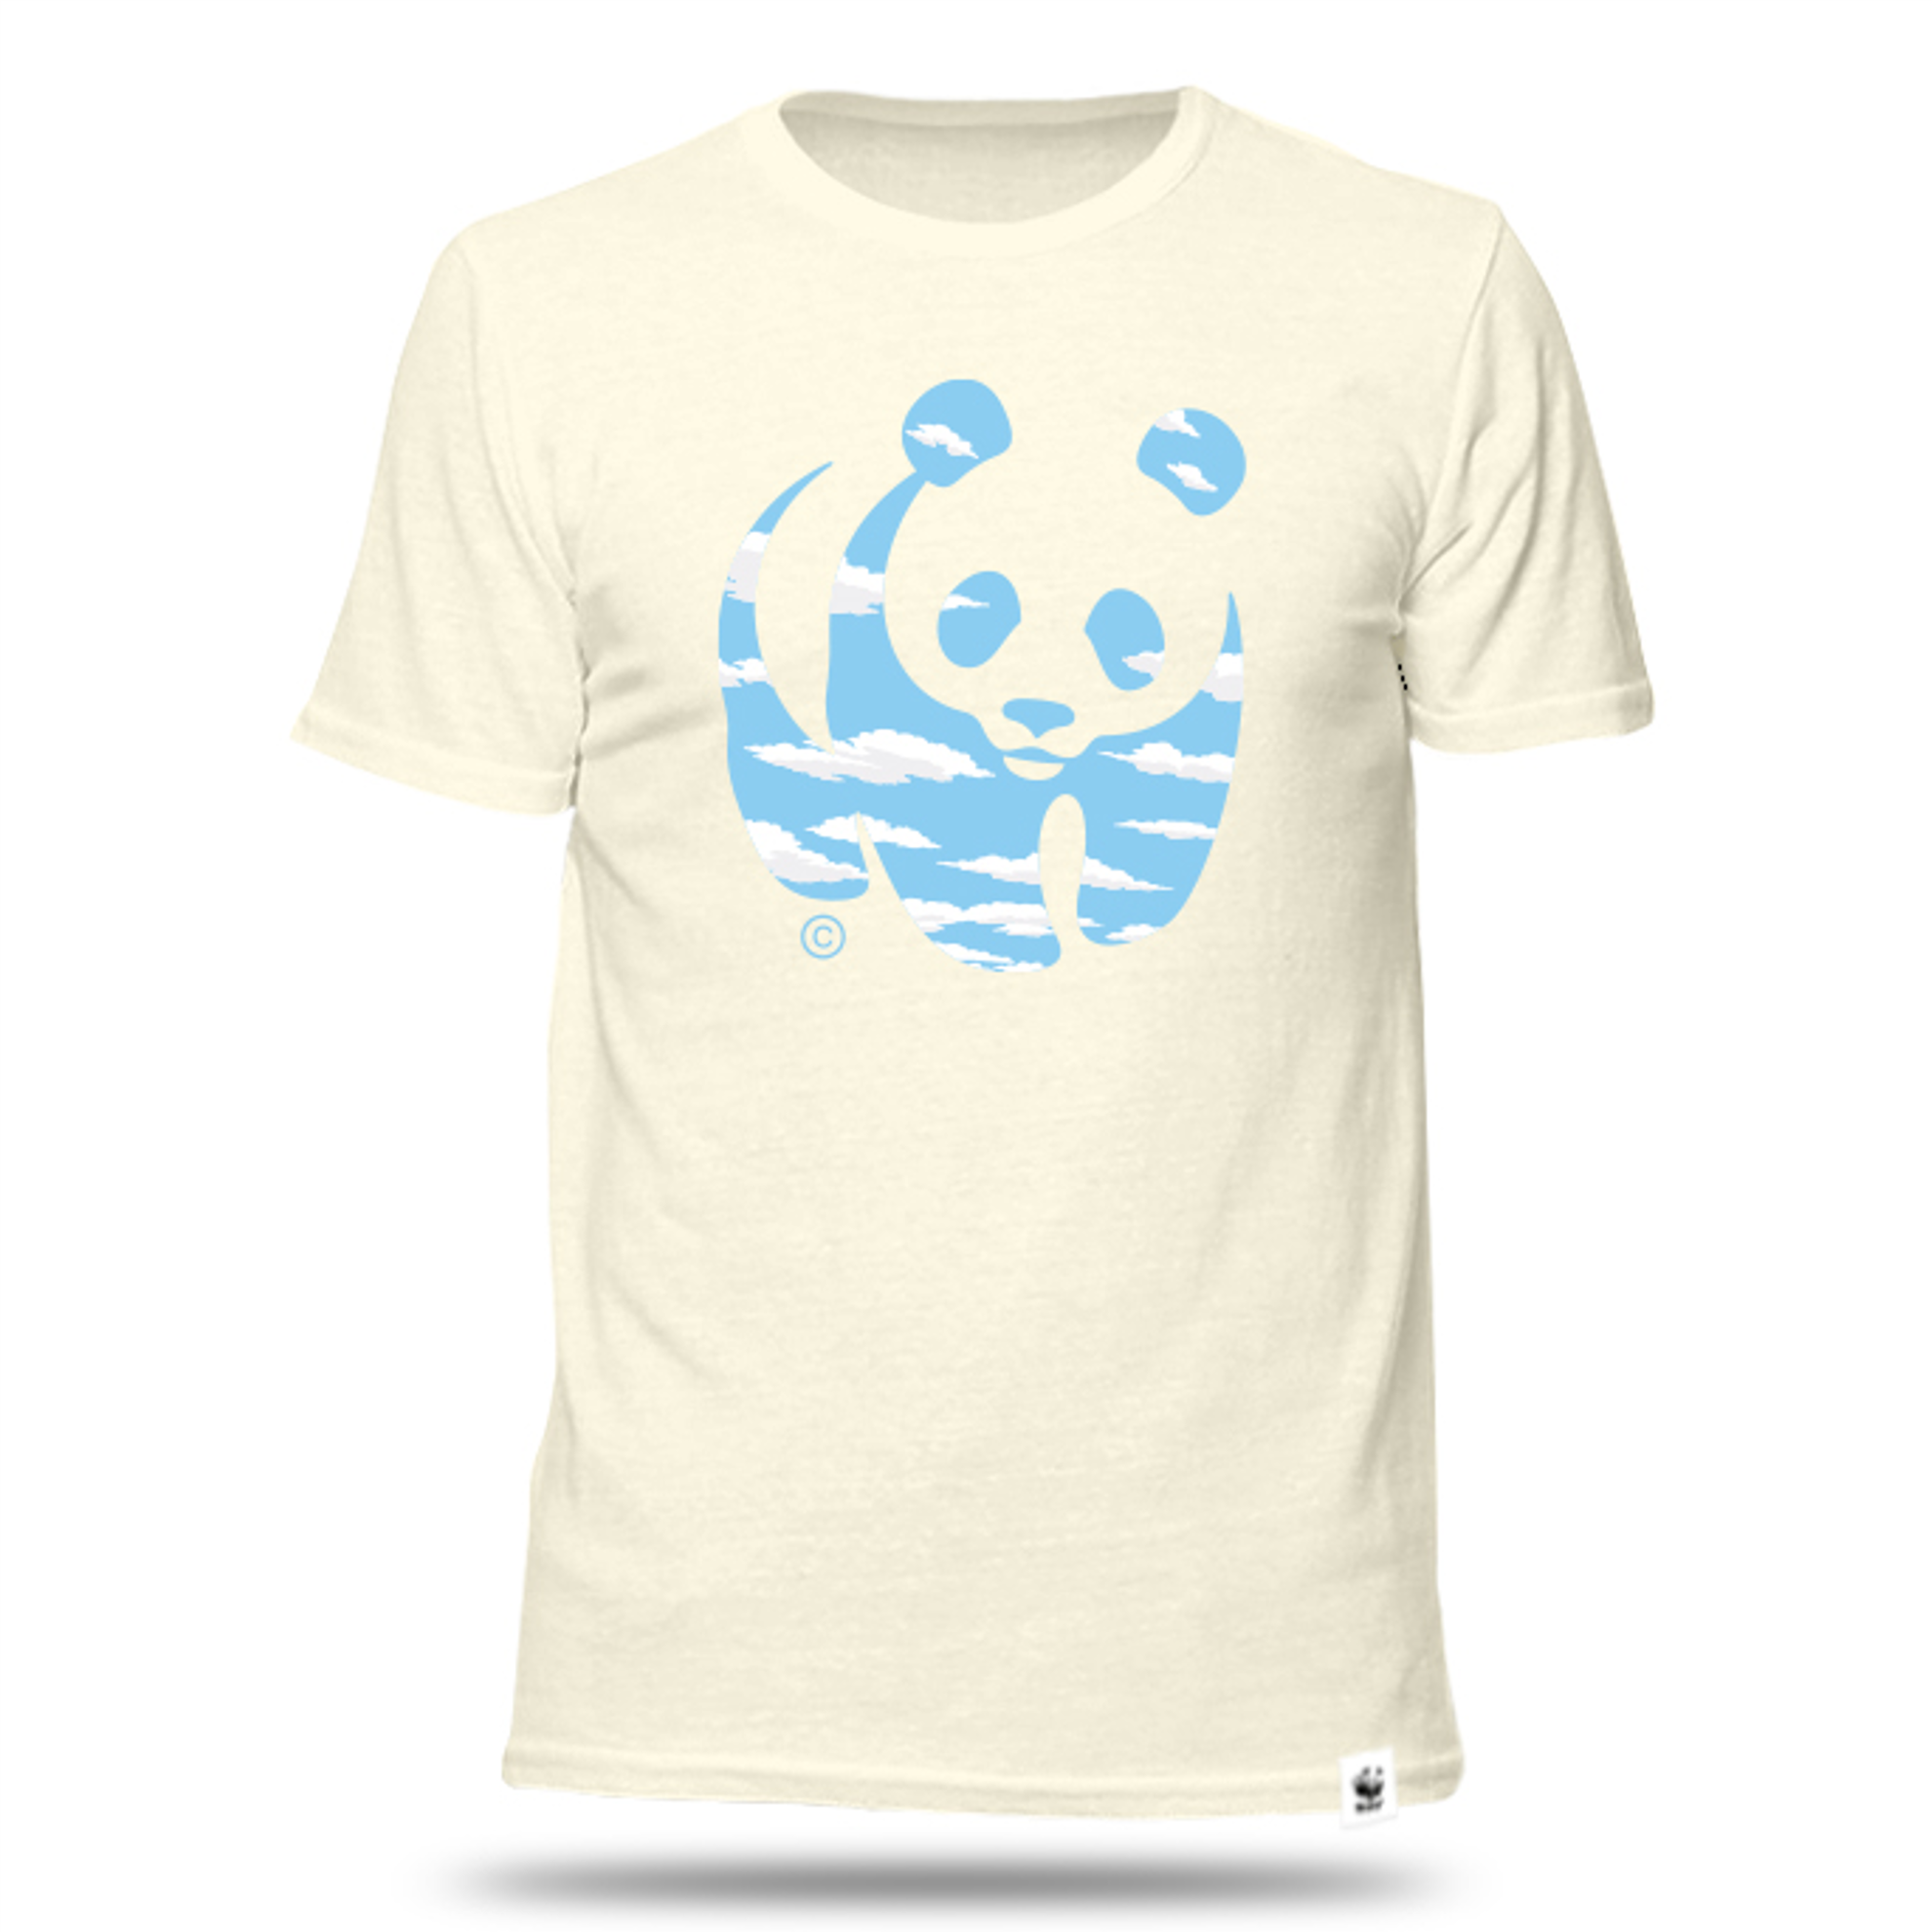 Unisex cream colour t-shirt with the WWF logo with cloud graphic on the chest